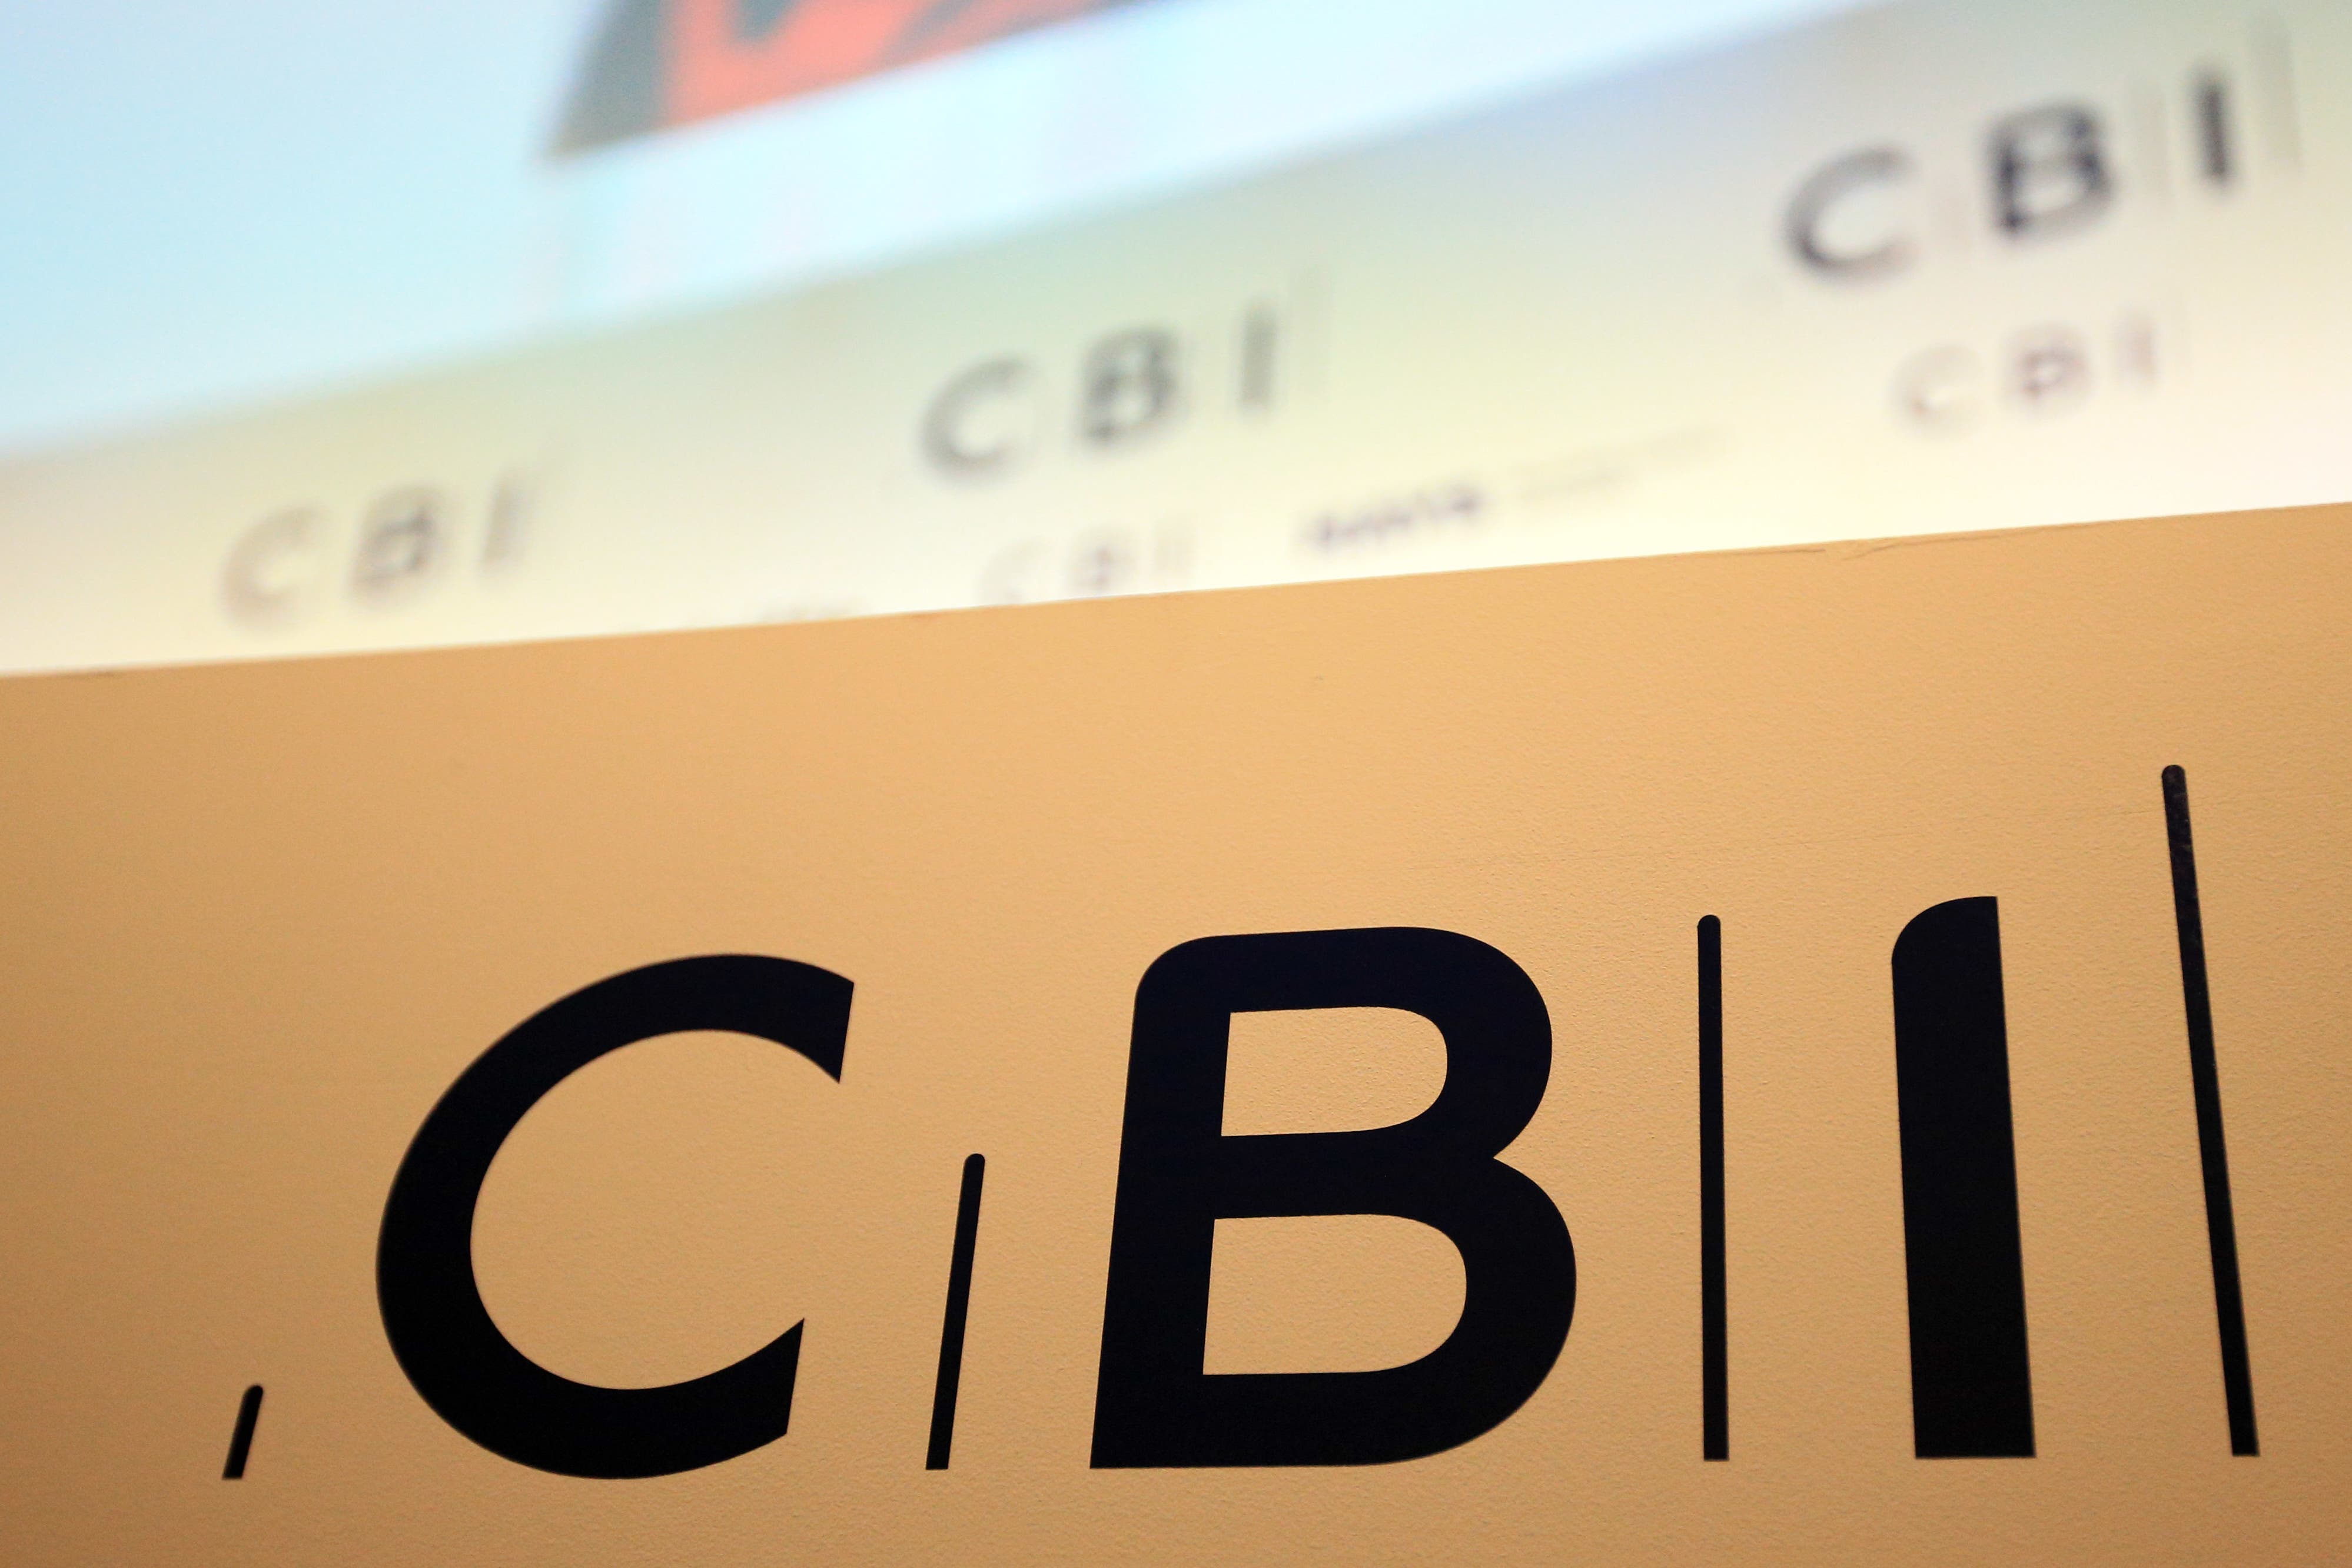 The Confederation of British Industry (CBI) annual dinner has been postponed following allegations of sexual misconduct (Jonathan Brady/PA)